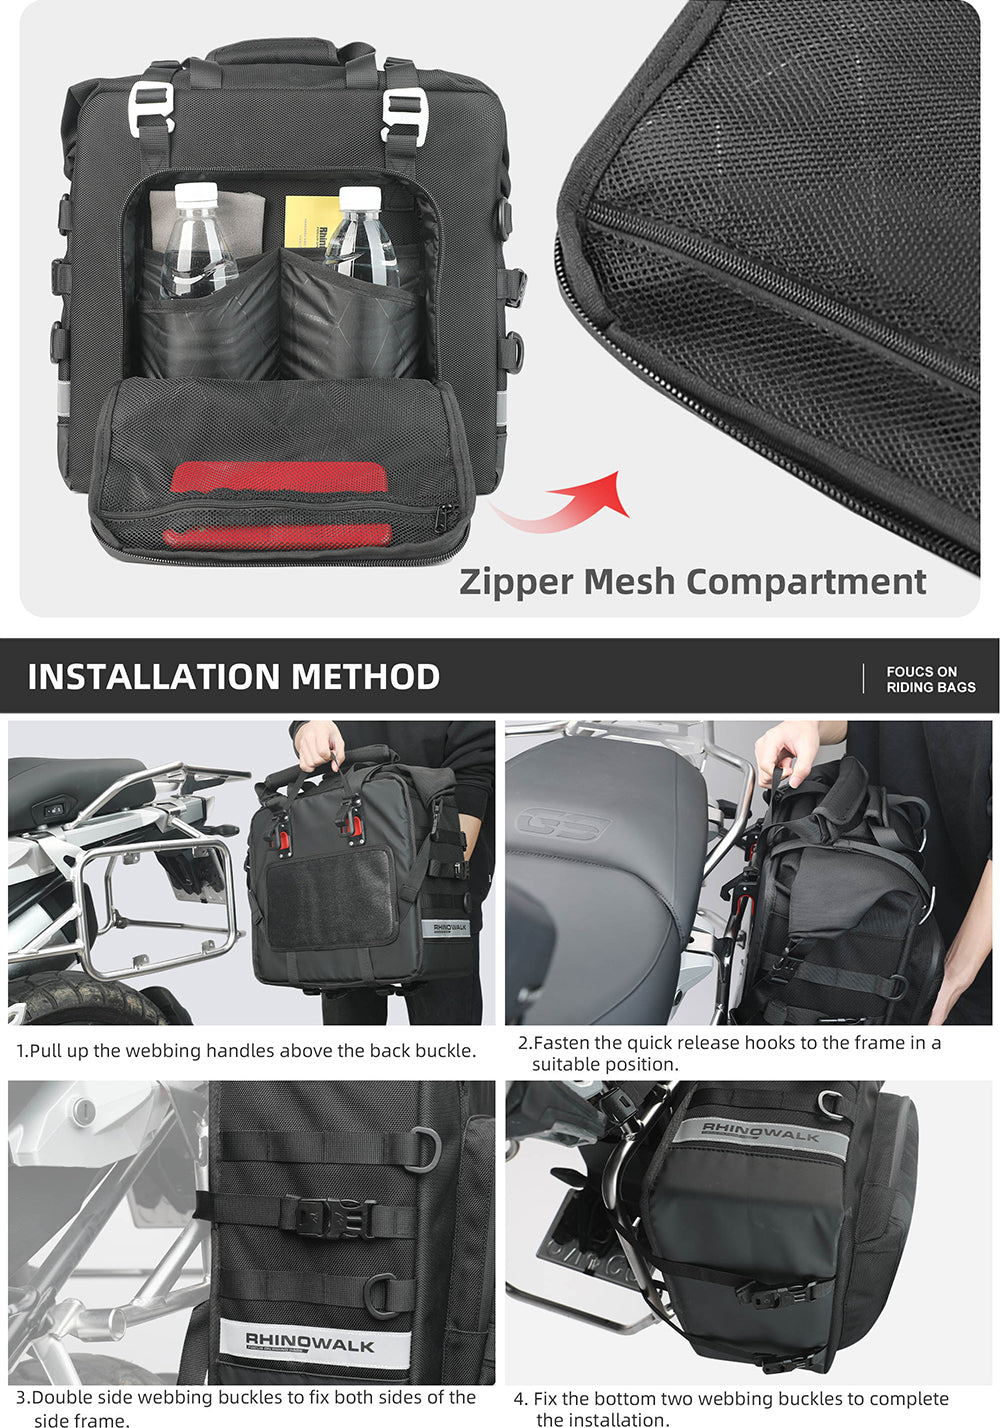 25 litres Motorcycle Side Bag - 1 piece